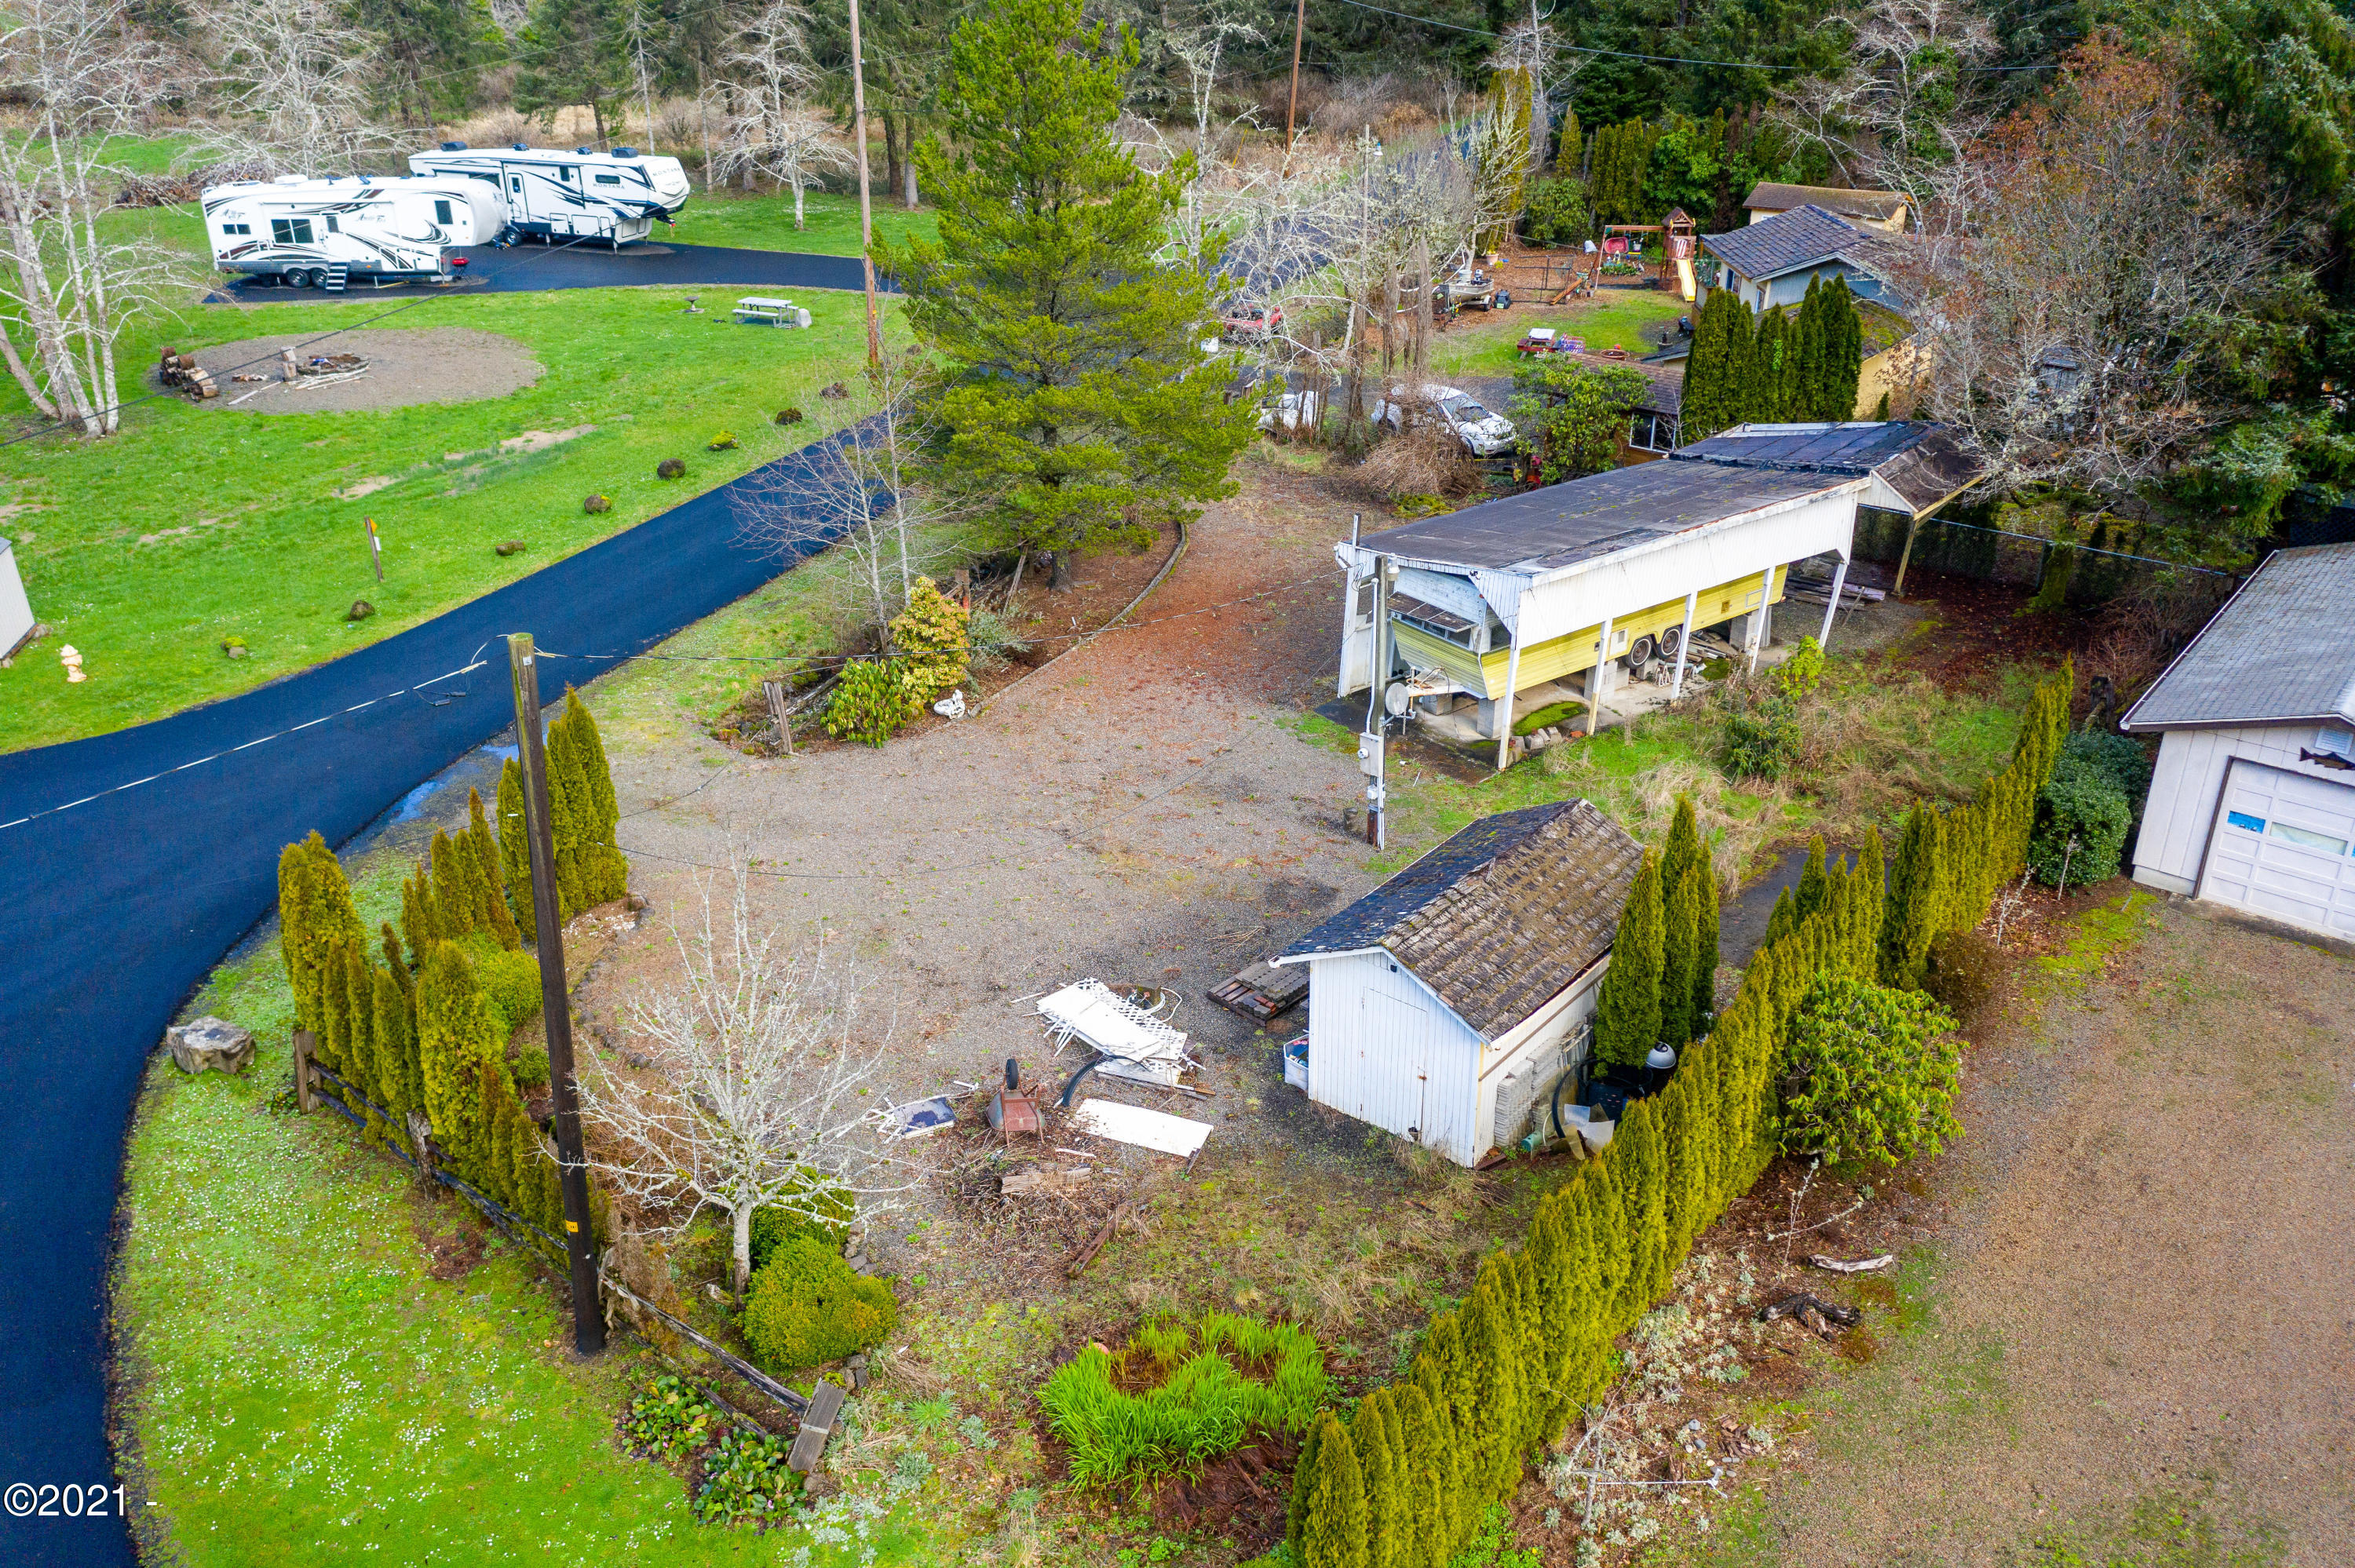 99 S Fun River Ln Depoe Bay, Gleneden Beach, Lincoln City, Newport, Otis, Rose Lodge, Seal Rock, Waldport, Yachats, To Home Listings - Amy Plechaty, Emerald Coast Realty Real Estate, homes for sale, property for sale